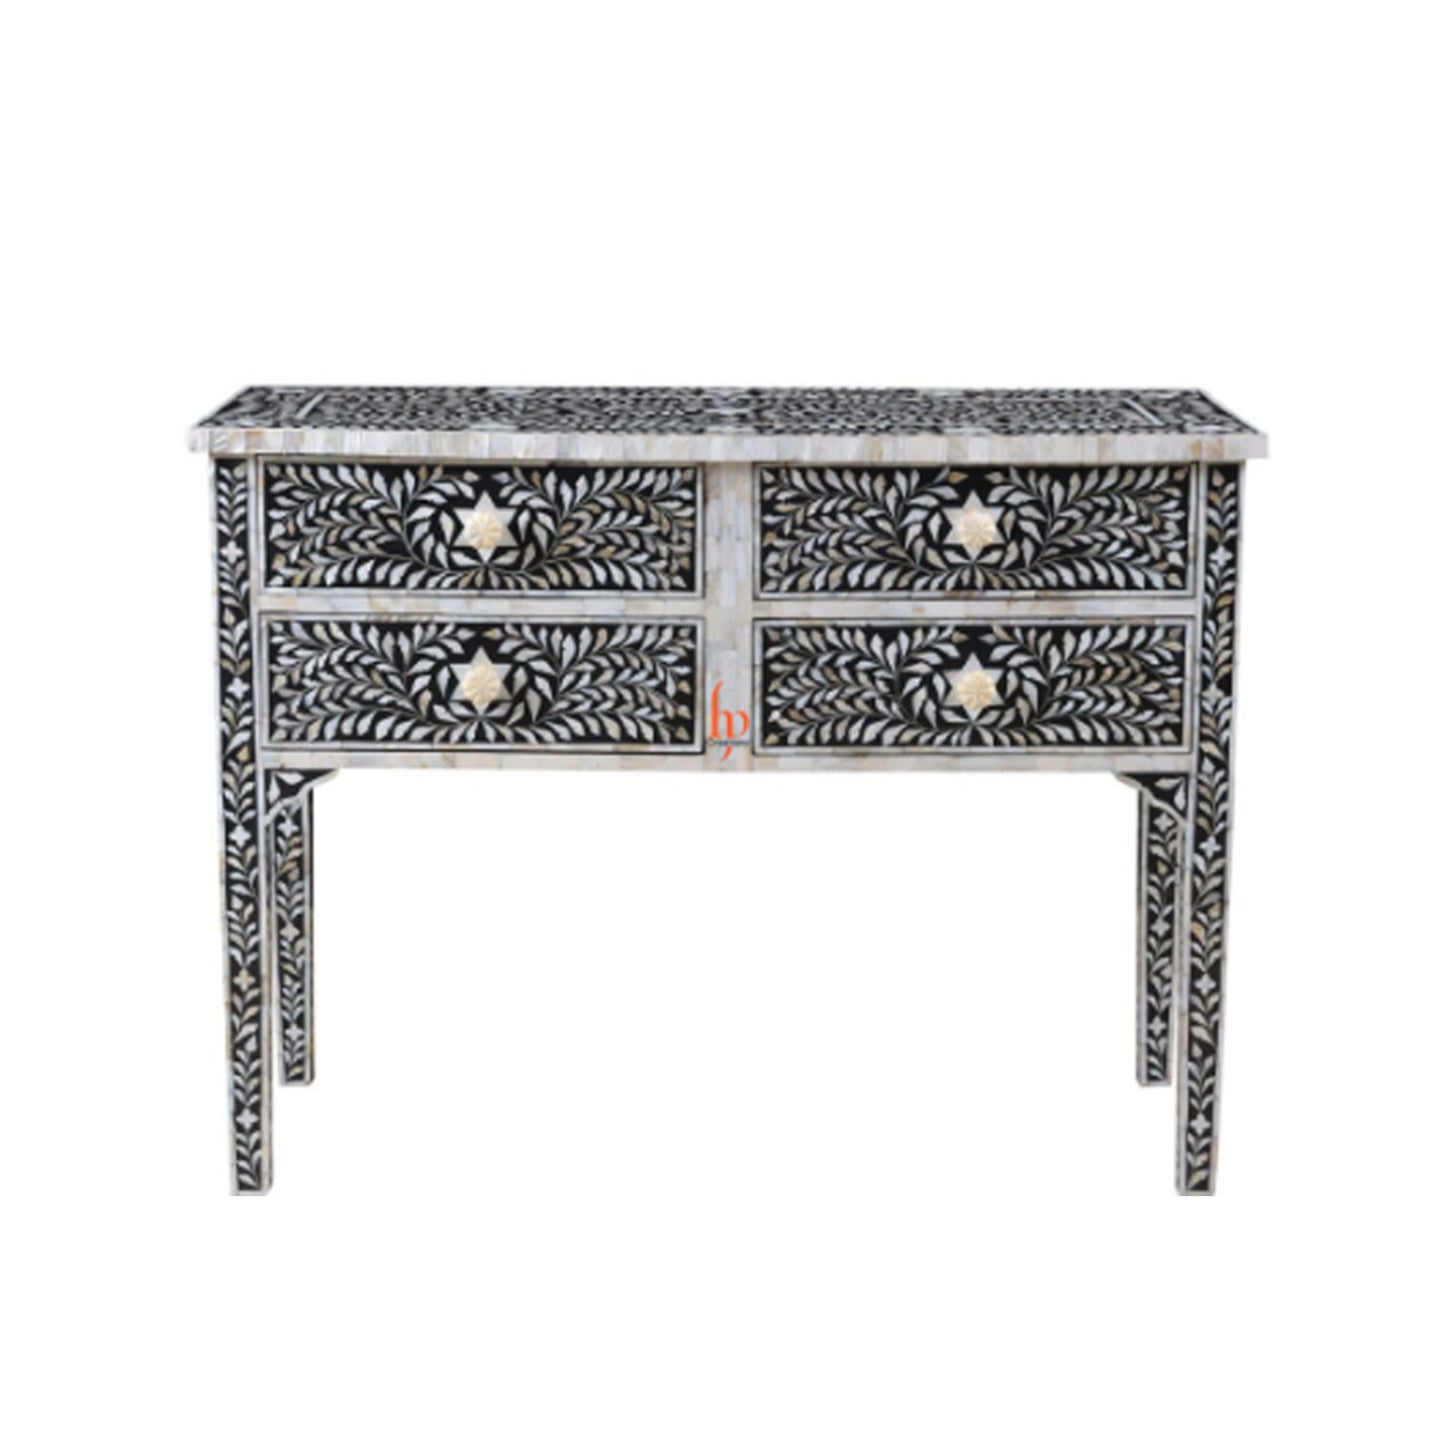 Handmade Mother Of Pearl Inlay Console with 4 Drawer Beautiful Floral Design Pretty Console Beautiful Entrance Table